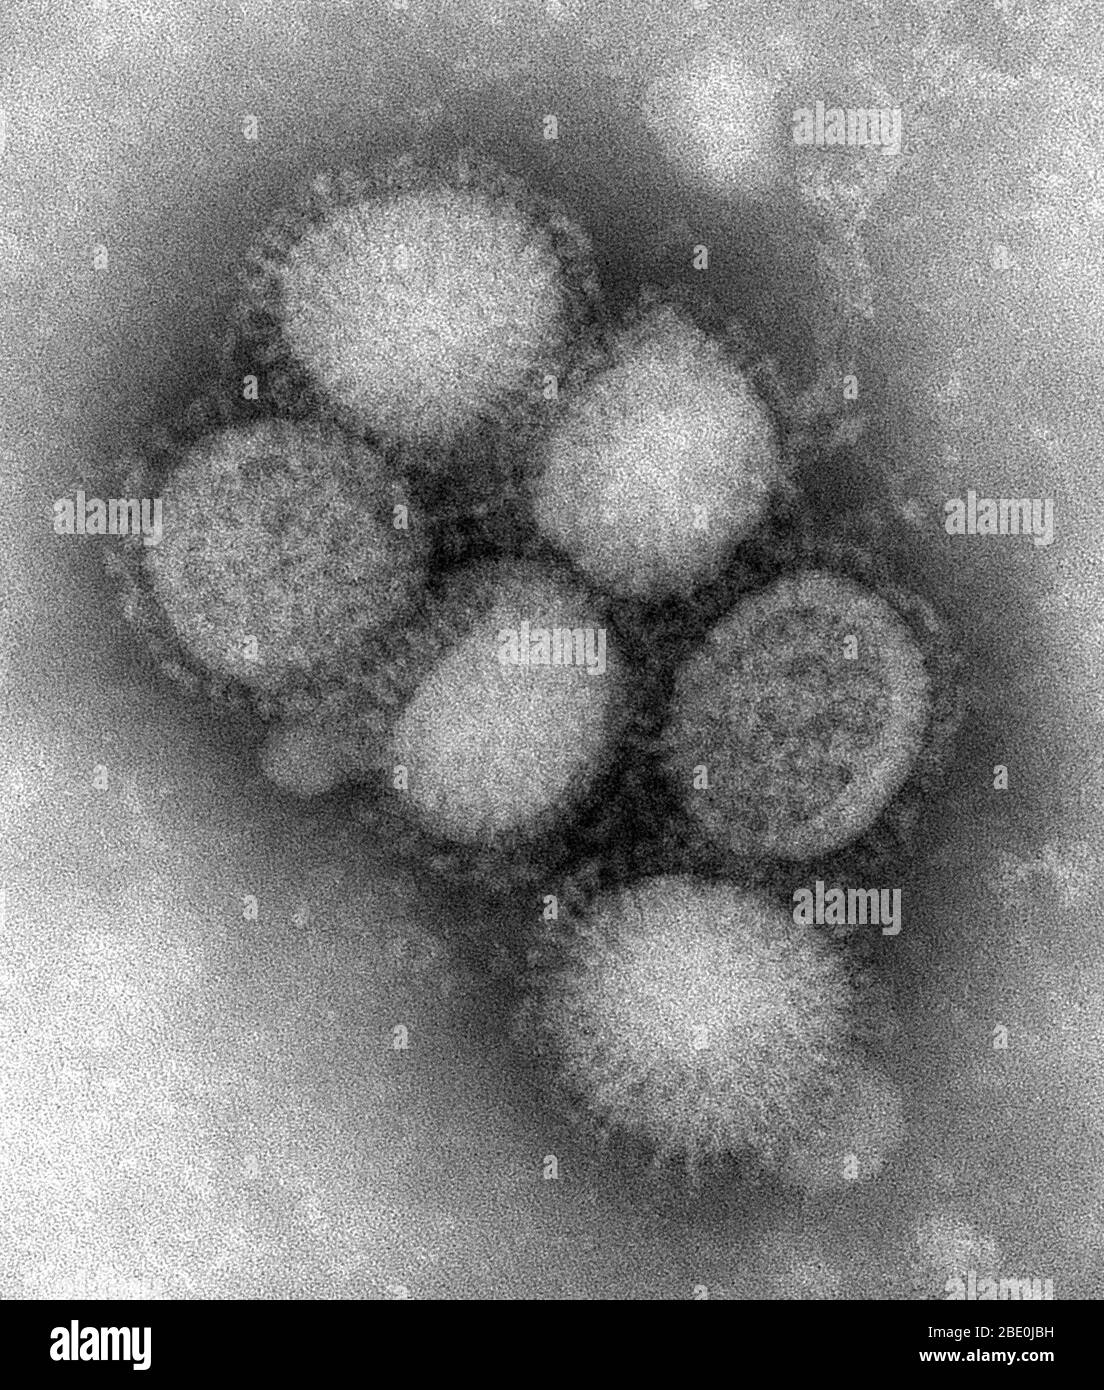 Transmission Electron Micrograph (TEM) depicting some of the ultrastructural morphology of the A/California/4/2009 (CA/4/09) swine flu virus.Swine influenza, also called pig influenza, swine flu, hog flu and pig flu, is an infection caused by any one of several types of swine influenza viruses. Swine influenza virus (SIV) or swine-origin influenza virus (S-OIV) is any strain of the influenza family of viruses that is endemic in pigs. Swine influenza virus is common throughout pig populations worldwide. Transmission of the virus from pigs to humans is not common and does not always lead to huma Stock Photo